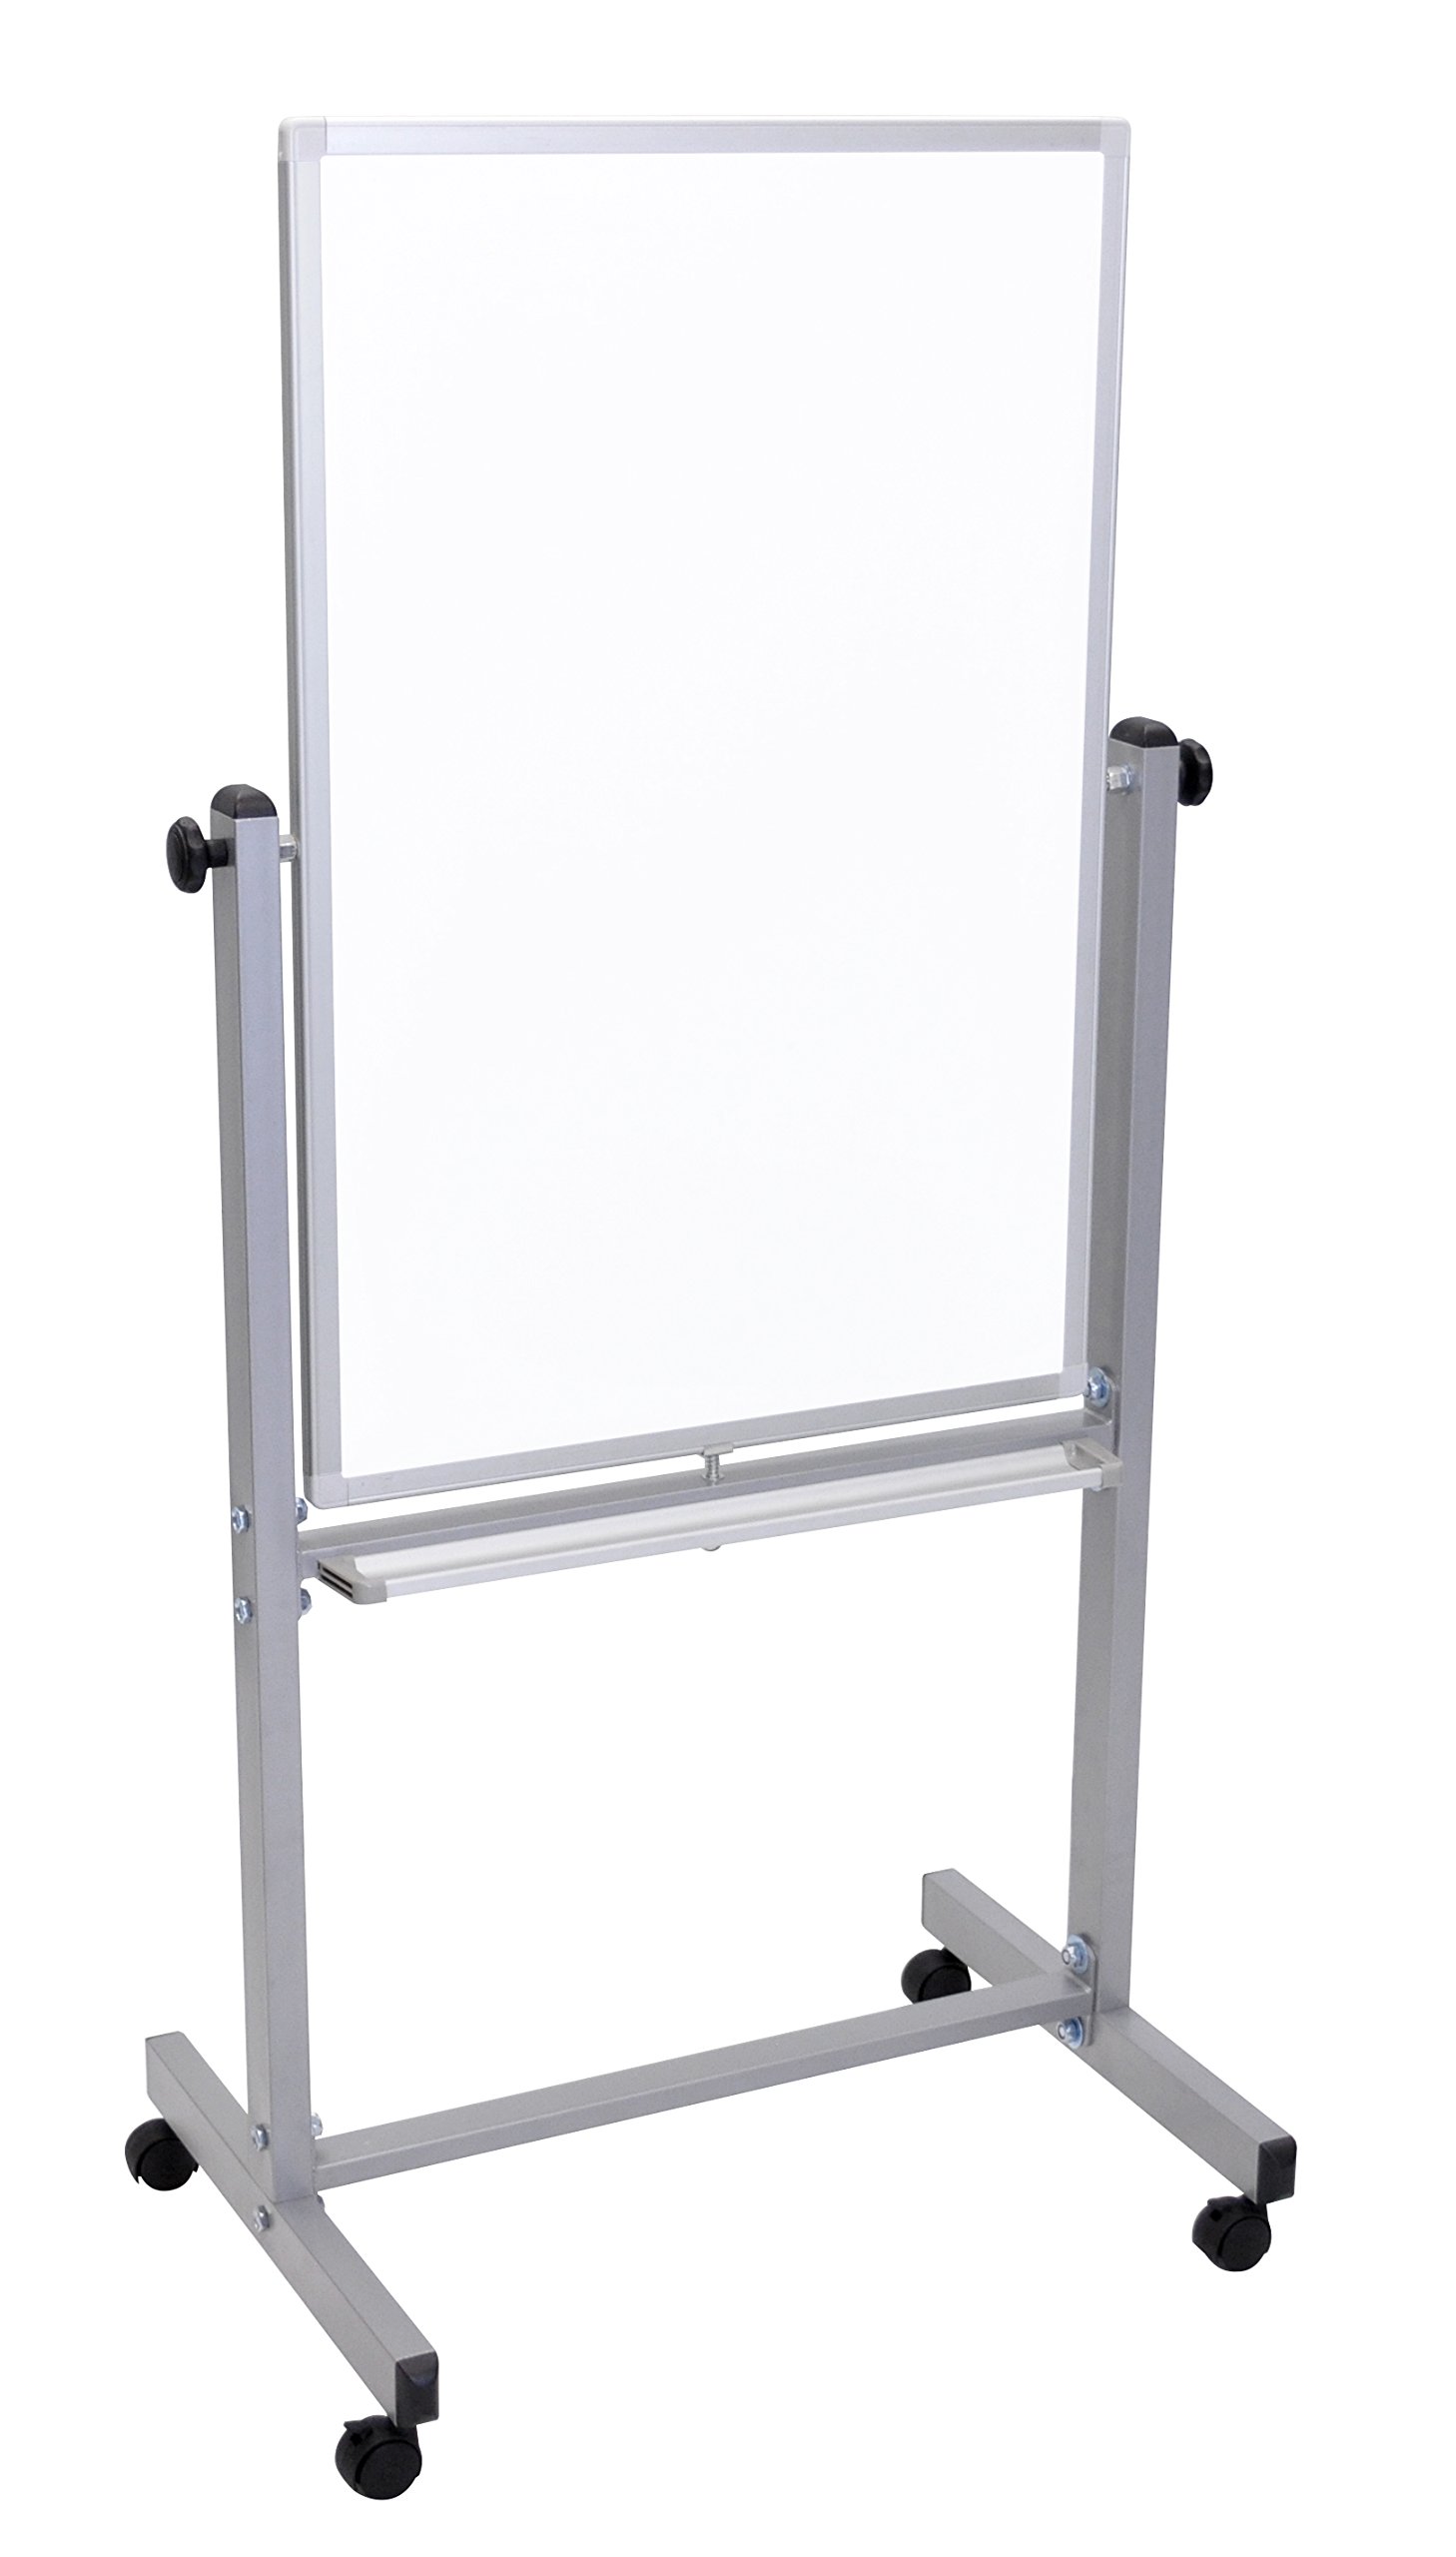 LUXOR Mobile Dry Erase Double-Sided Magnetic Whiteboard...